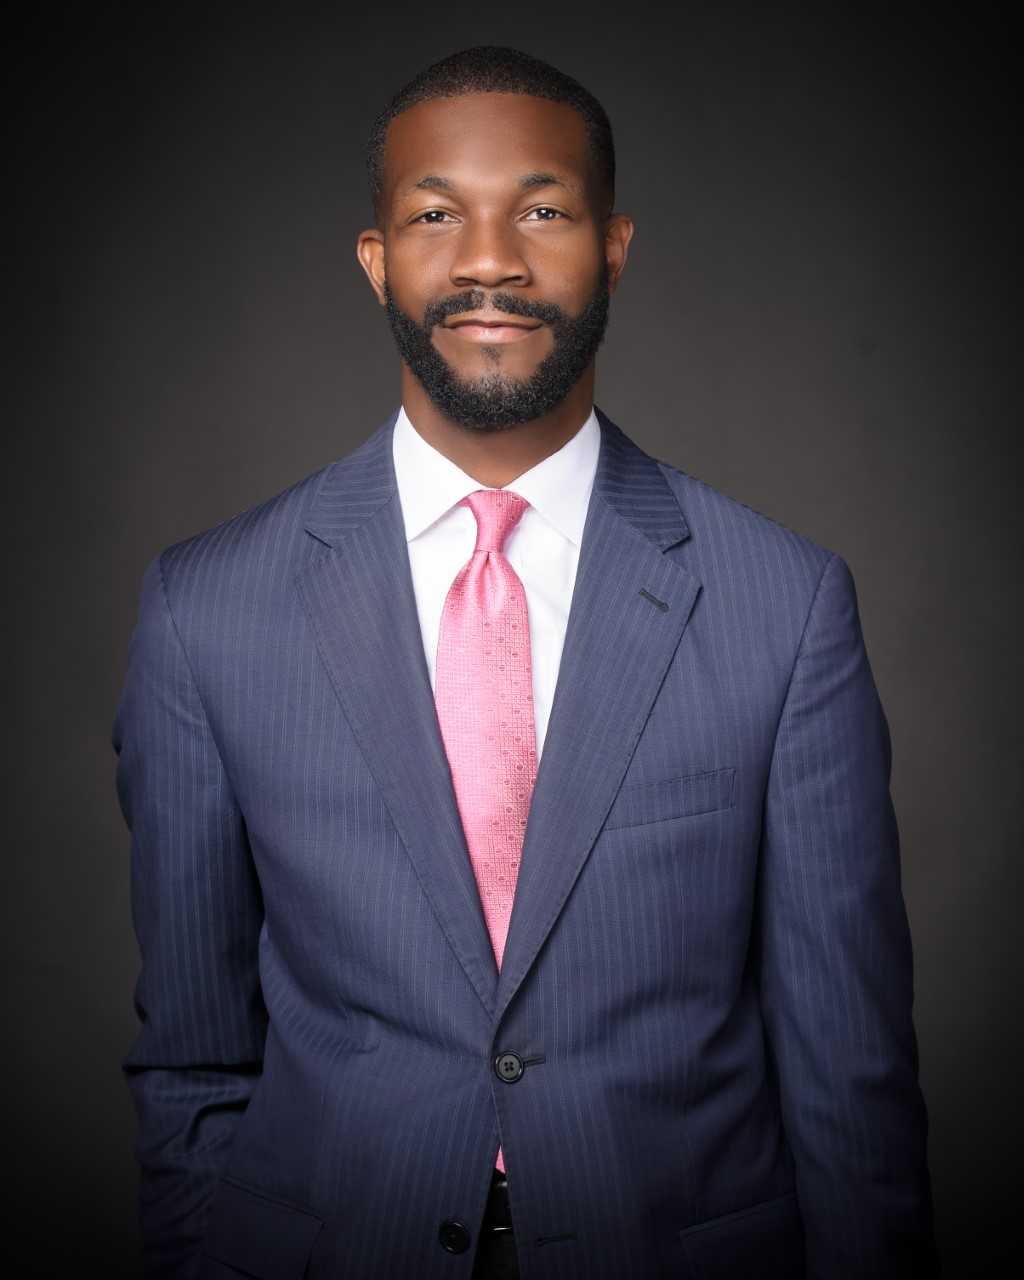 Mayor Woodfin Join Mayor Woodfin Dec. 6th at The Crisis Center's holiday breakfast